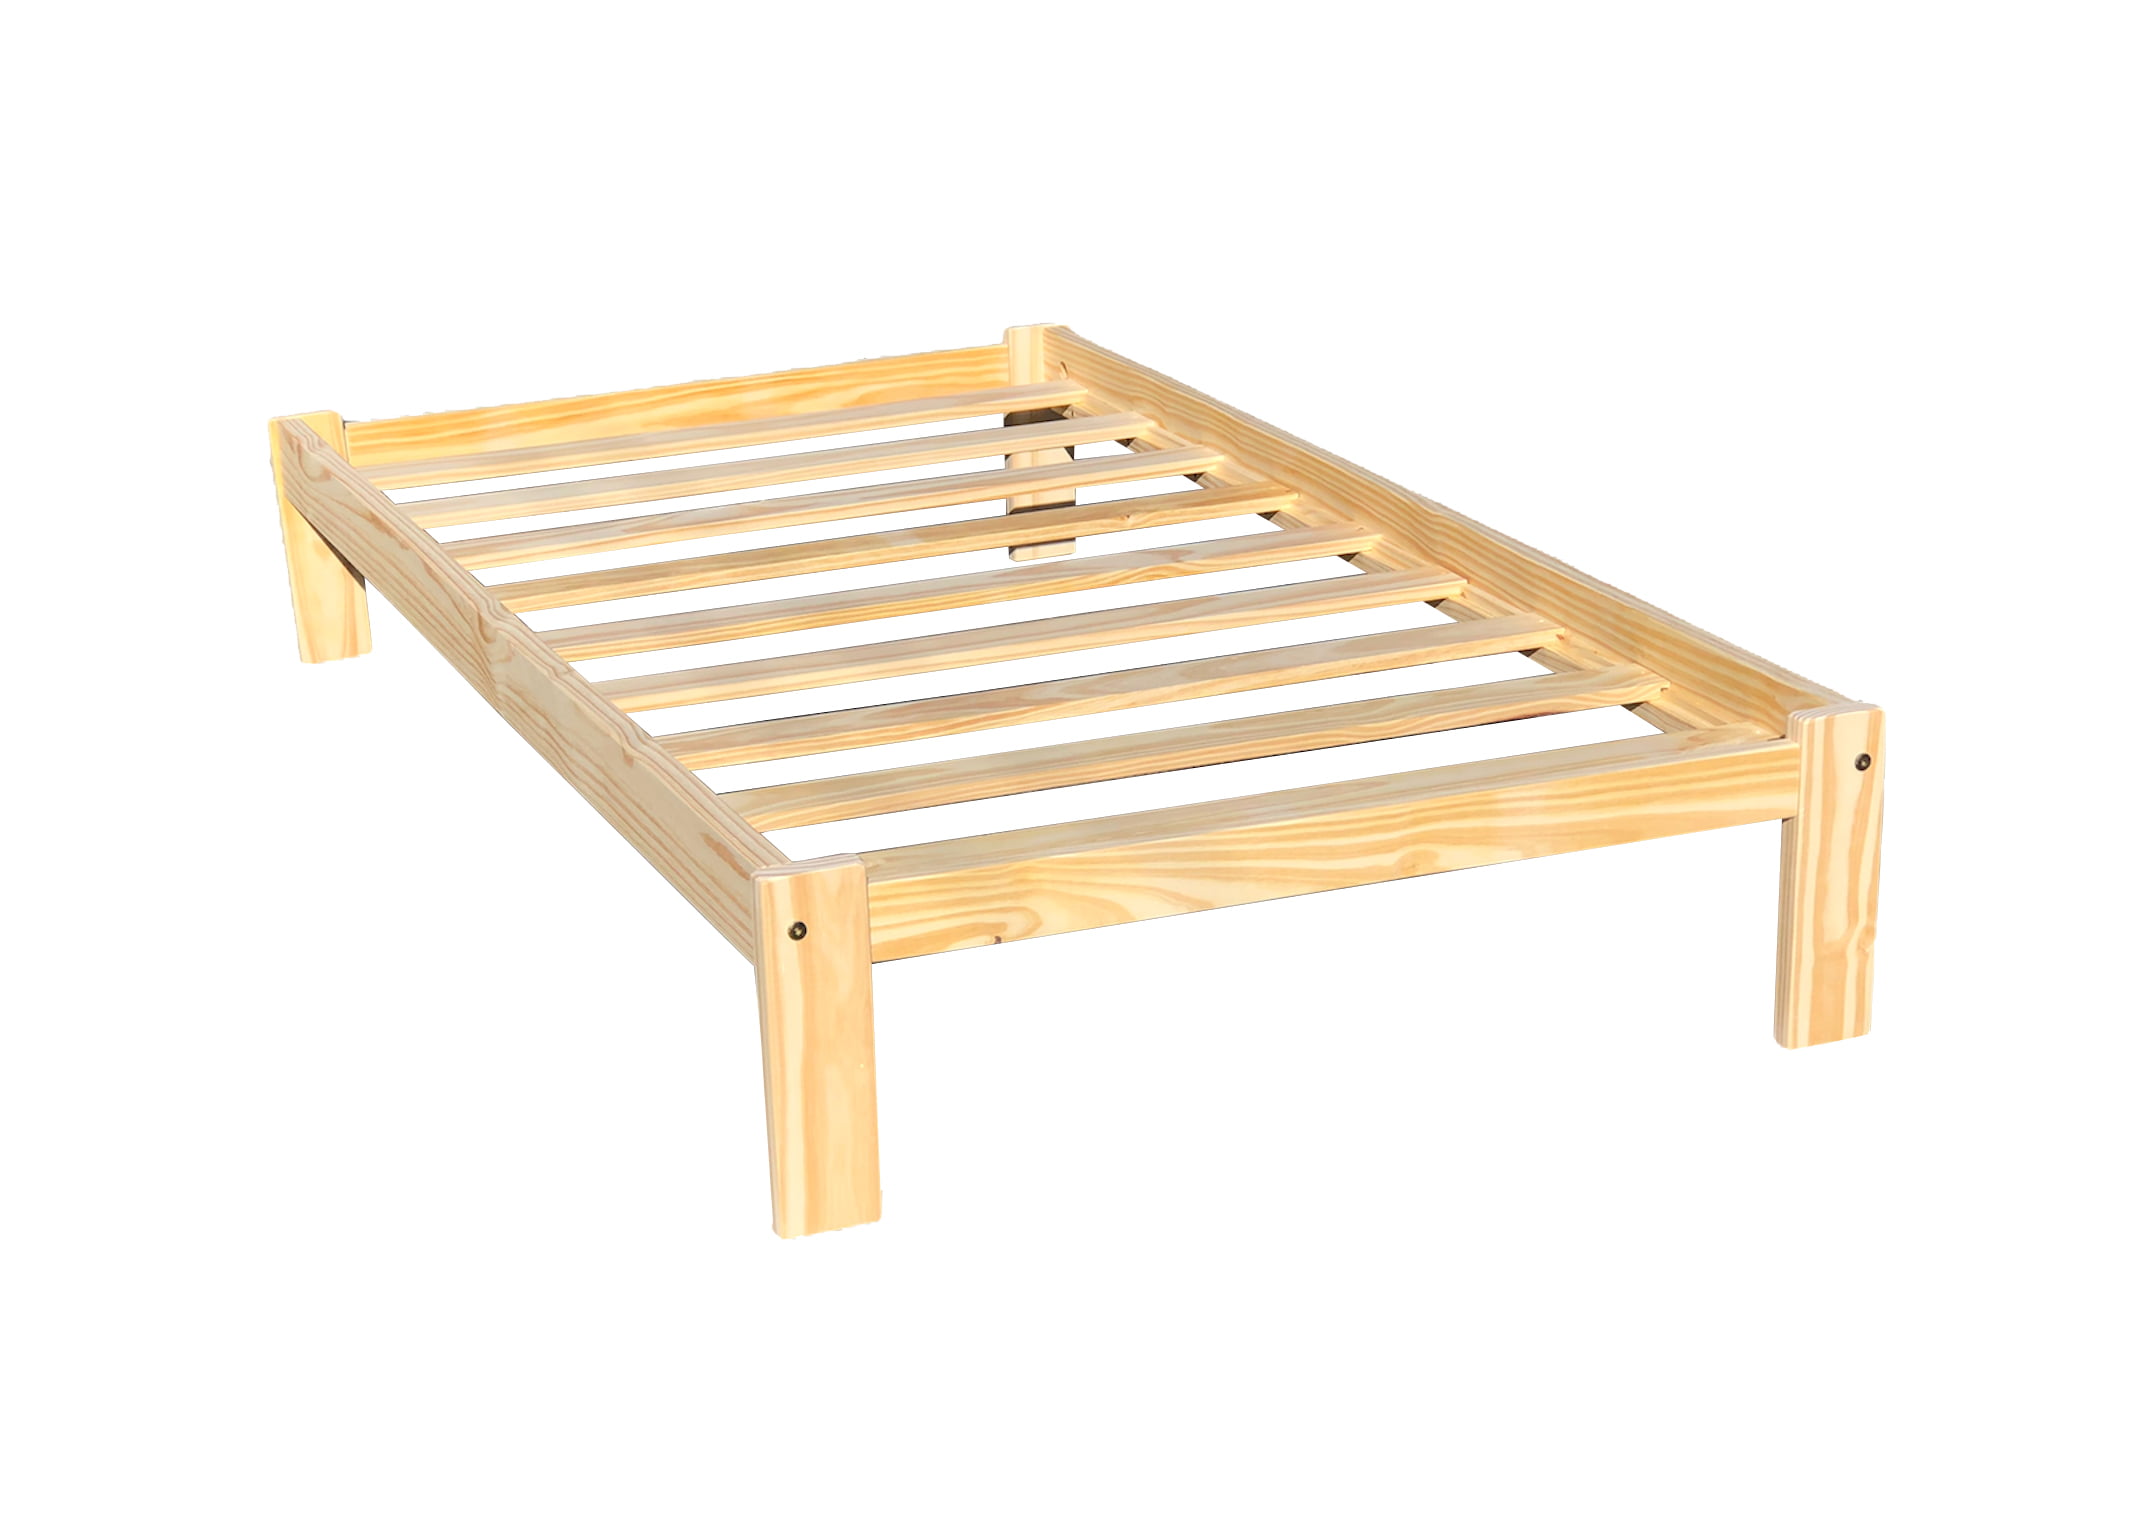 Alaska Wooden Twin Xl Bed Platform, What Size Is An Extra Large Twin Bed